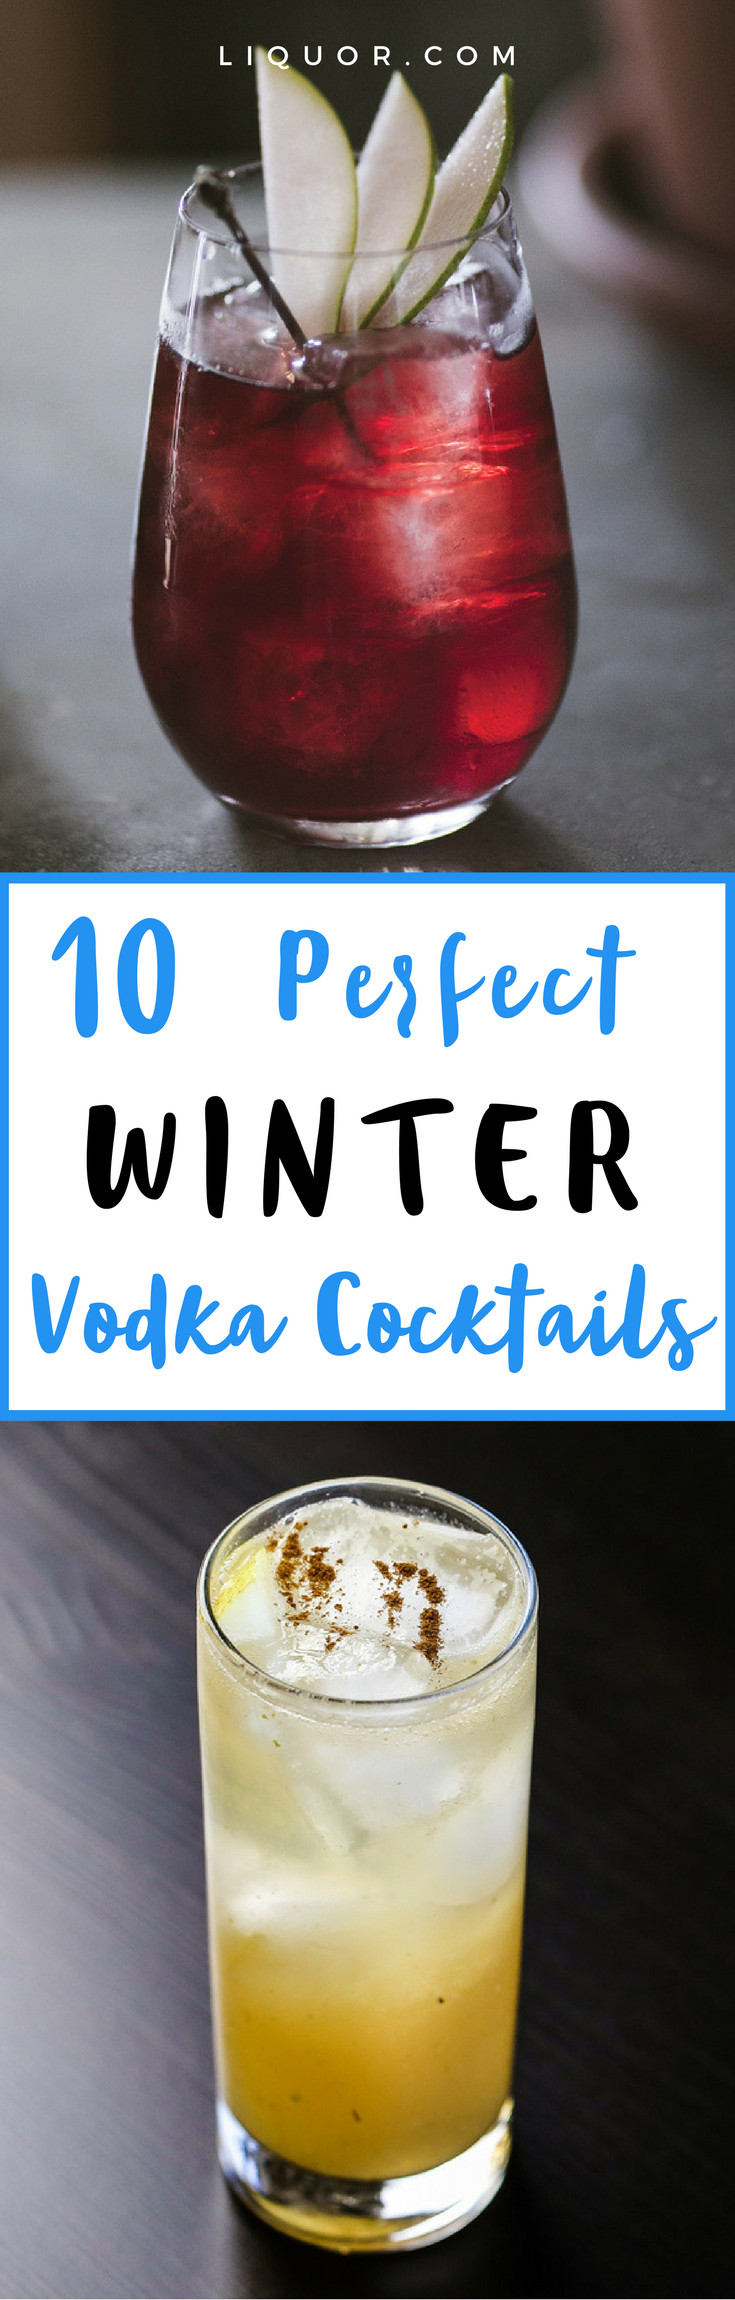 Winter Drinks With Vodka
 10 Vodka Cocktails That Are Perfect for Winter